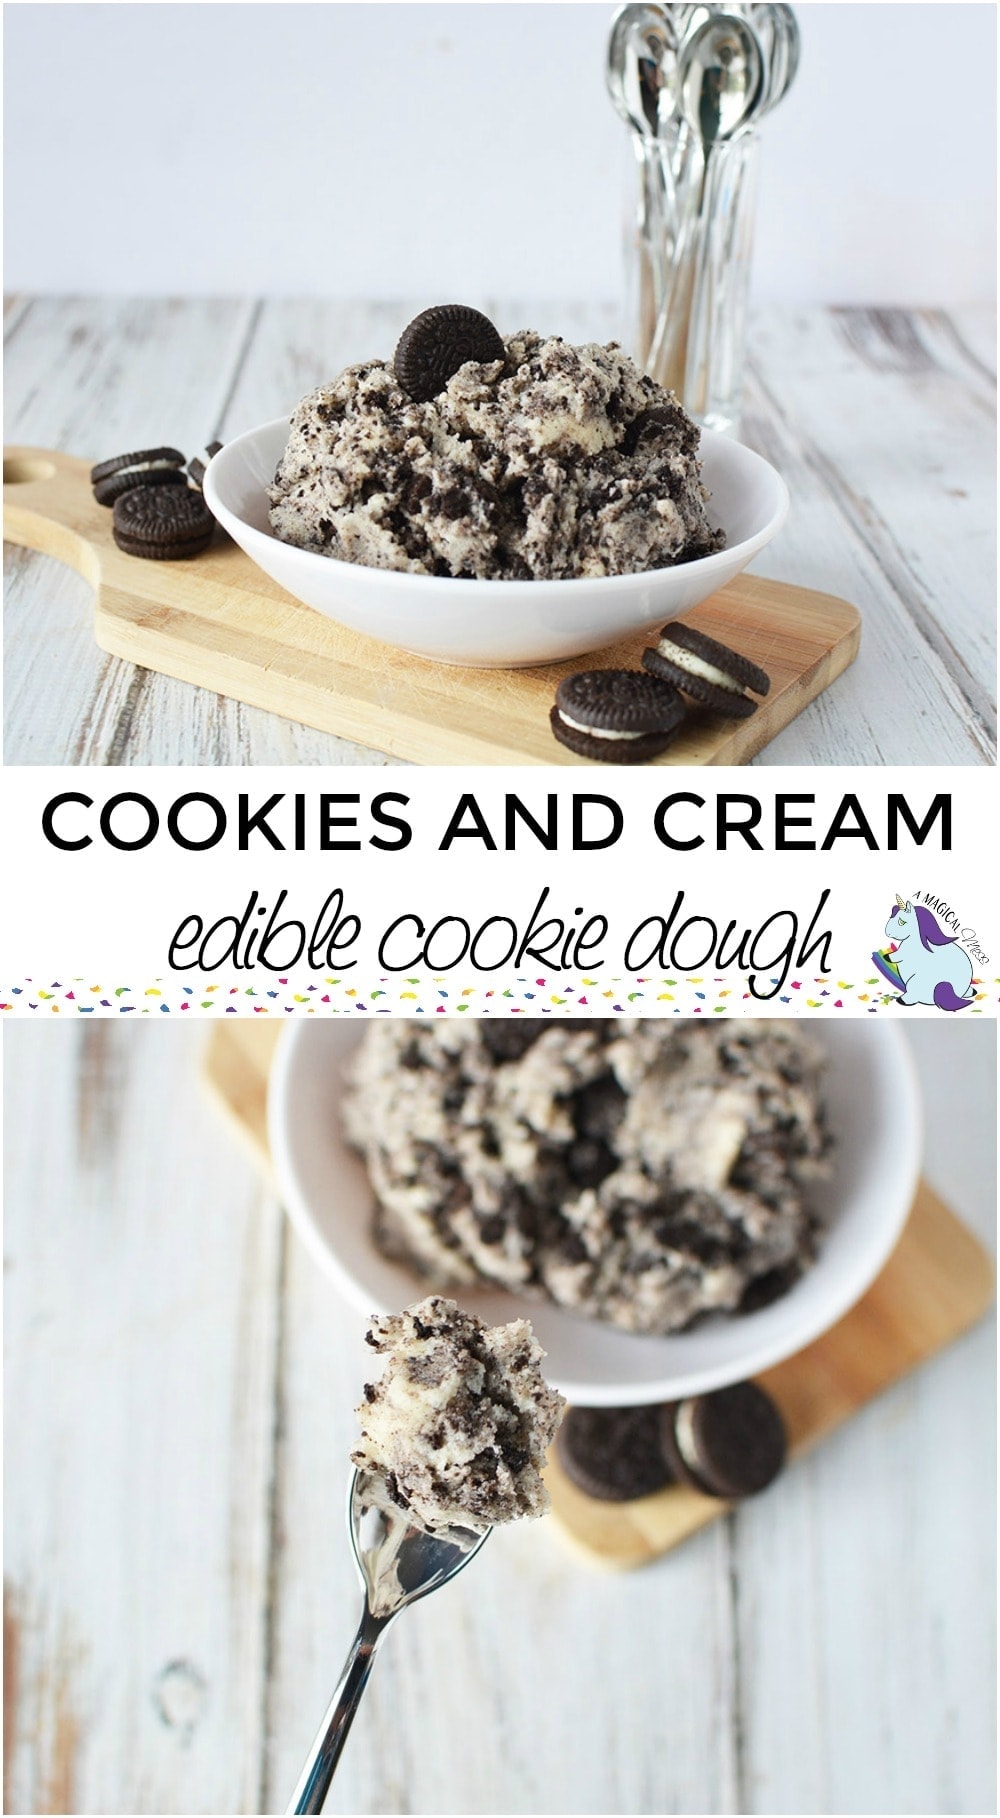 Bowls of oreo cookie dough with a spoon.